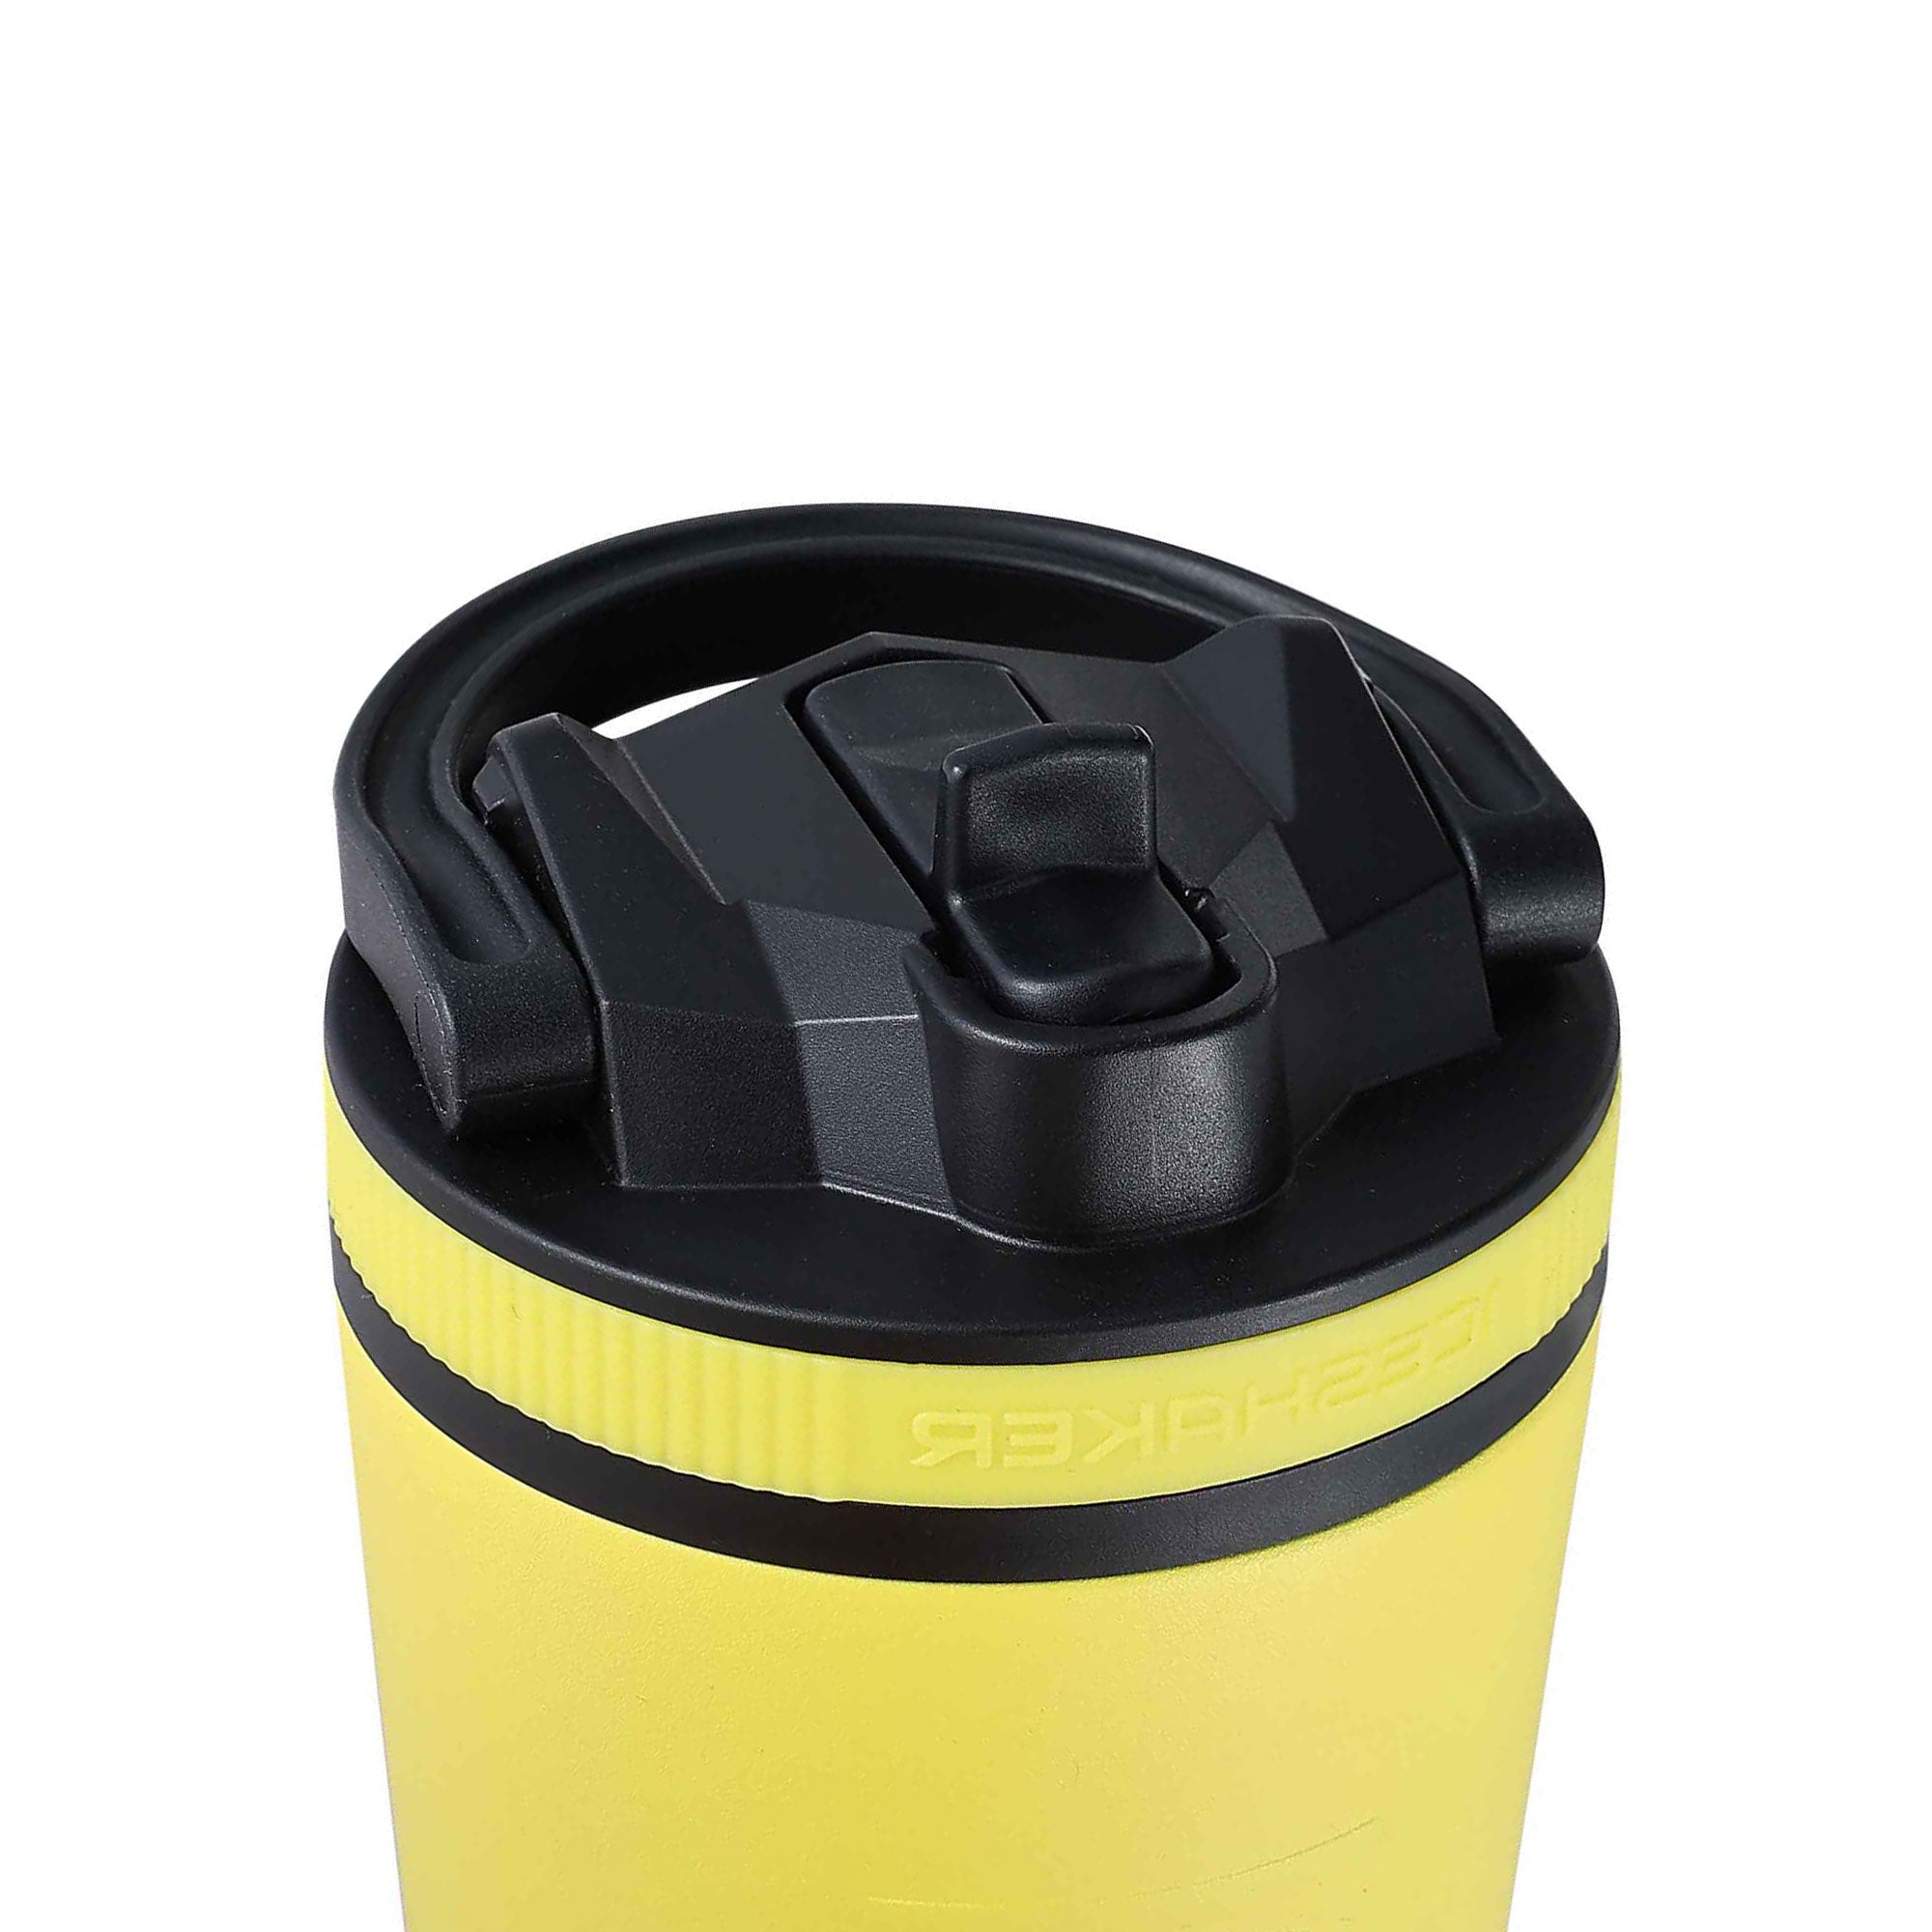 26oz Sport Bottle Lid & Internal Straw - Black Lid with Yellow Band